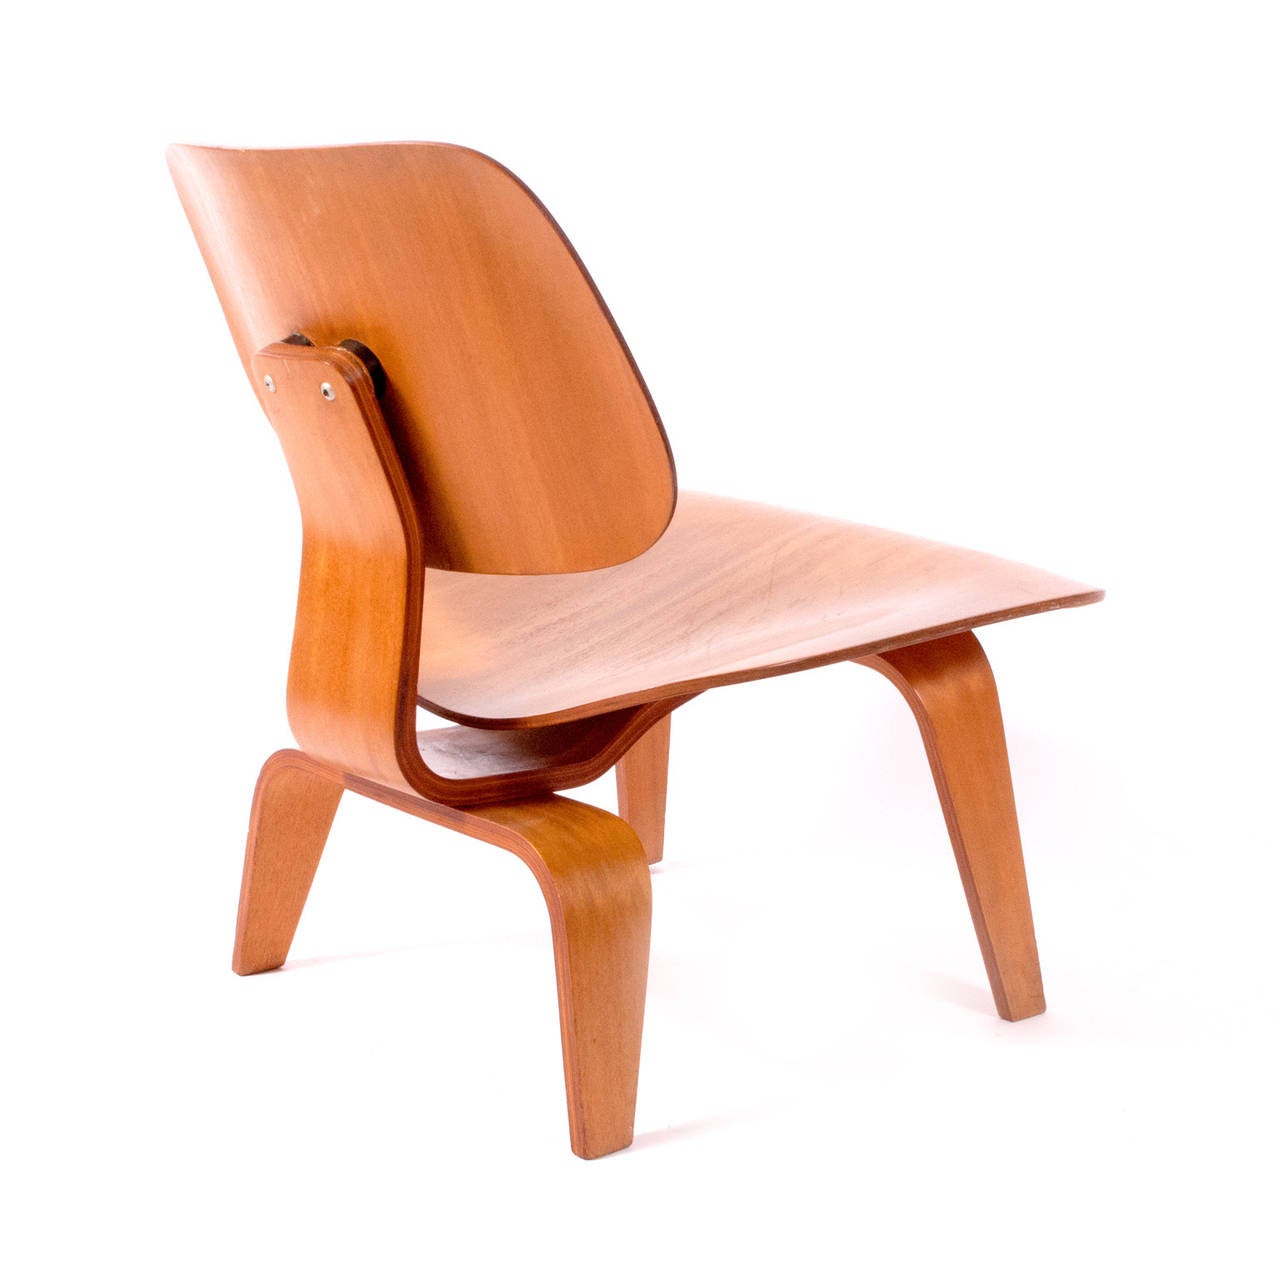 Modern Pre Production LCW Charles & Ray Eames Chair, 1945